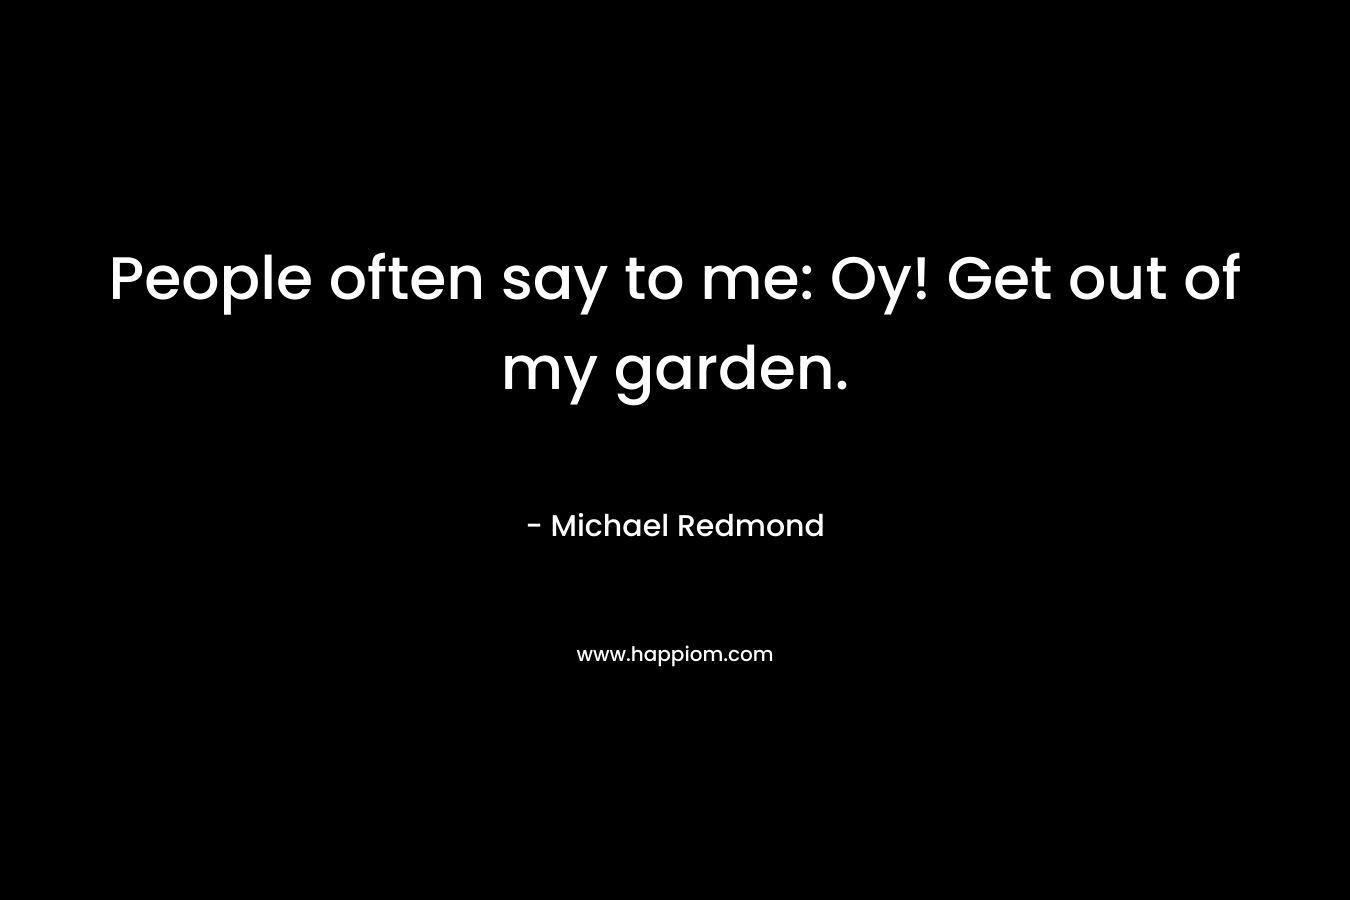 People often say to me: Oy! Get out of my garden. – Michael Redmond